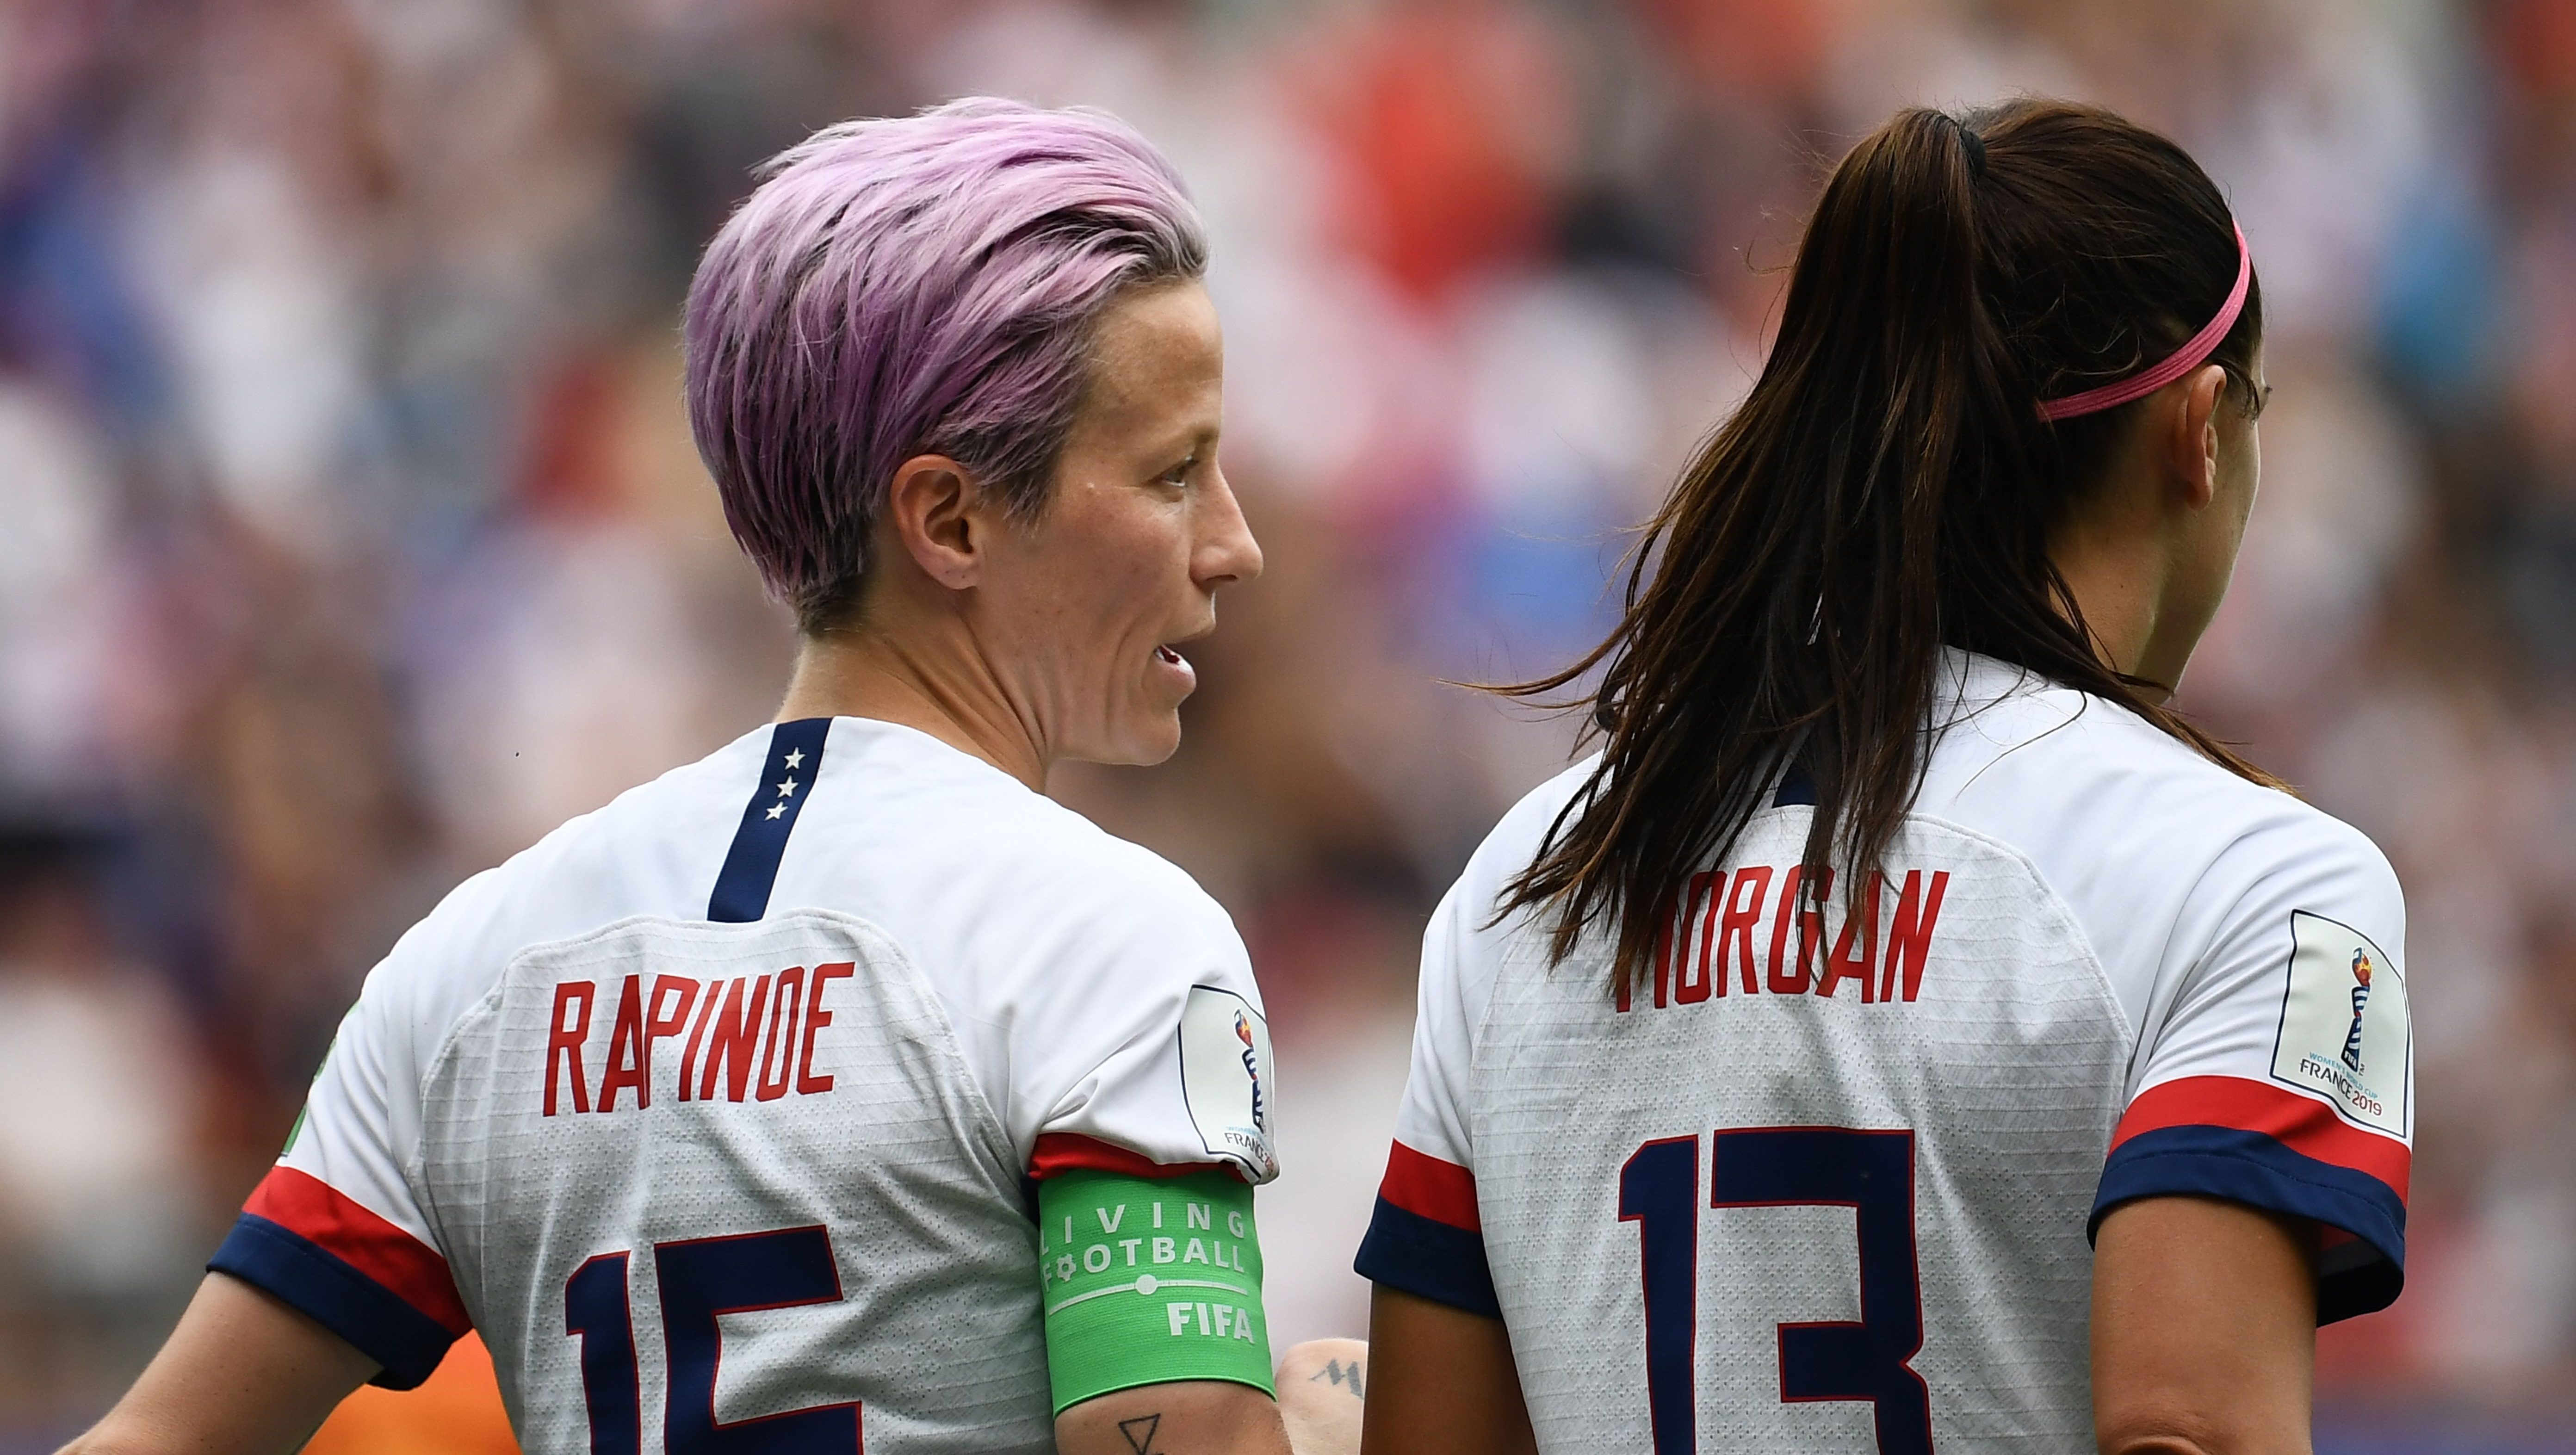 USA vs France Live Stream: How to Watch World Cup Online | Heavy.com